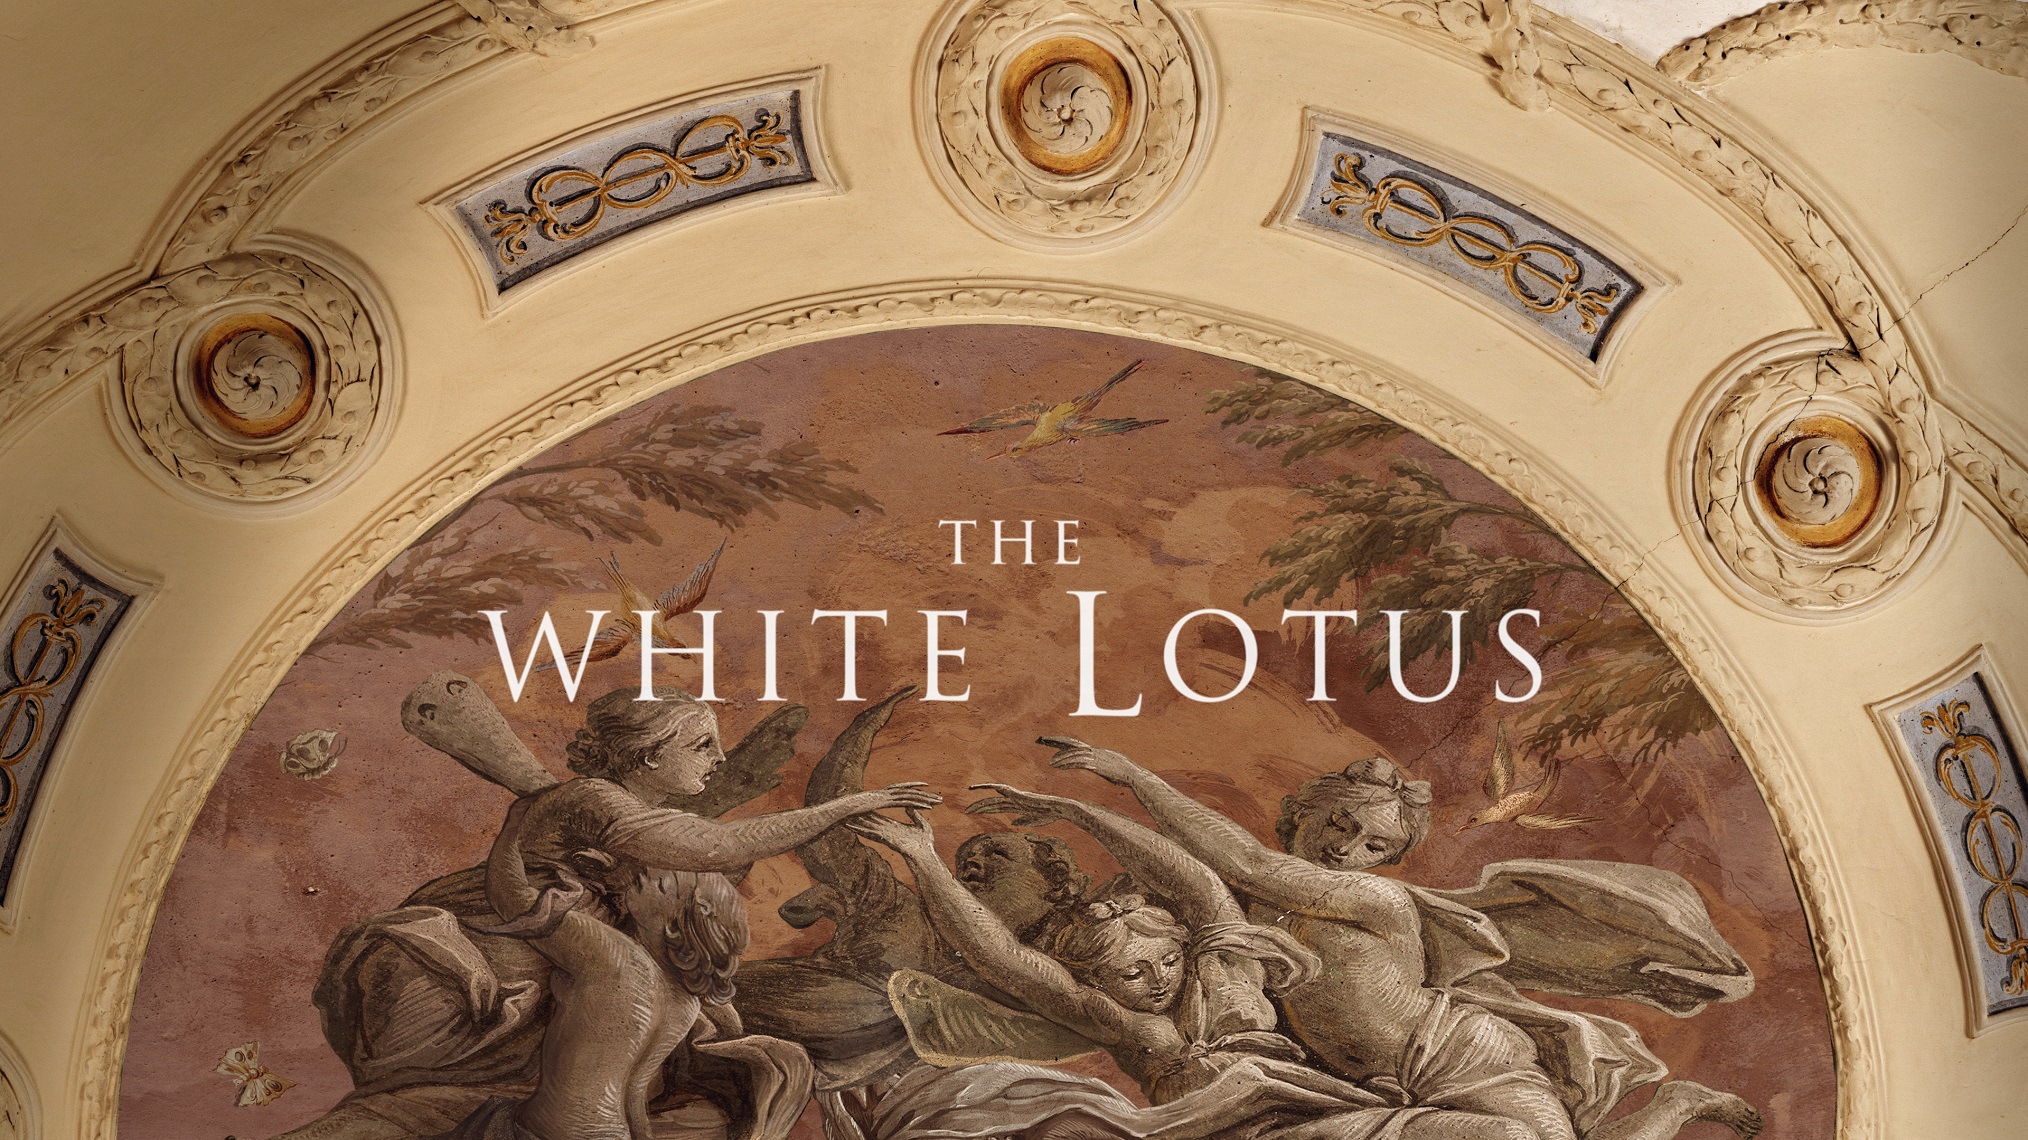 The White Lotus': Inside the Opulent Sicilian Villa From Episode 5